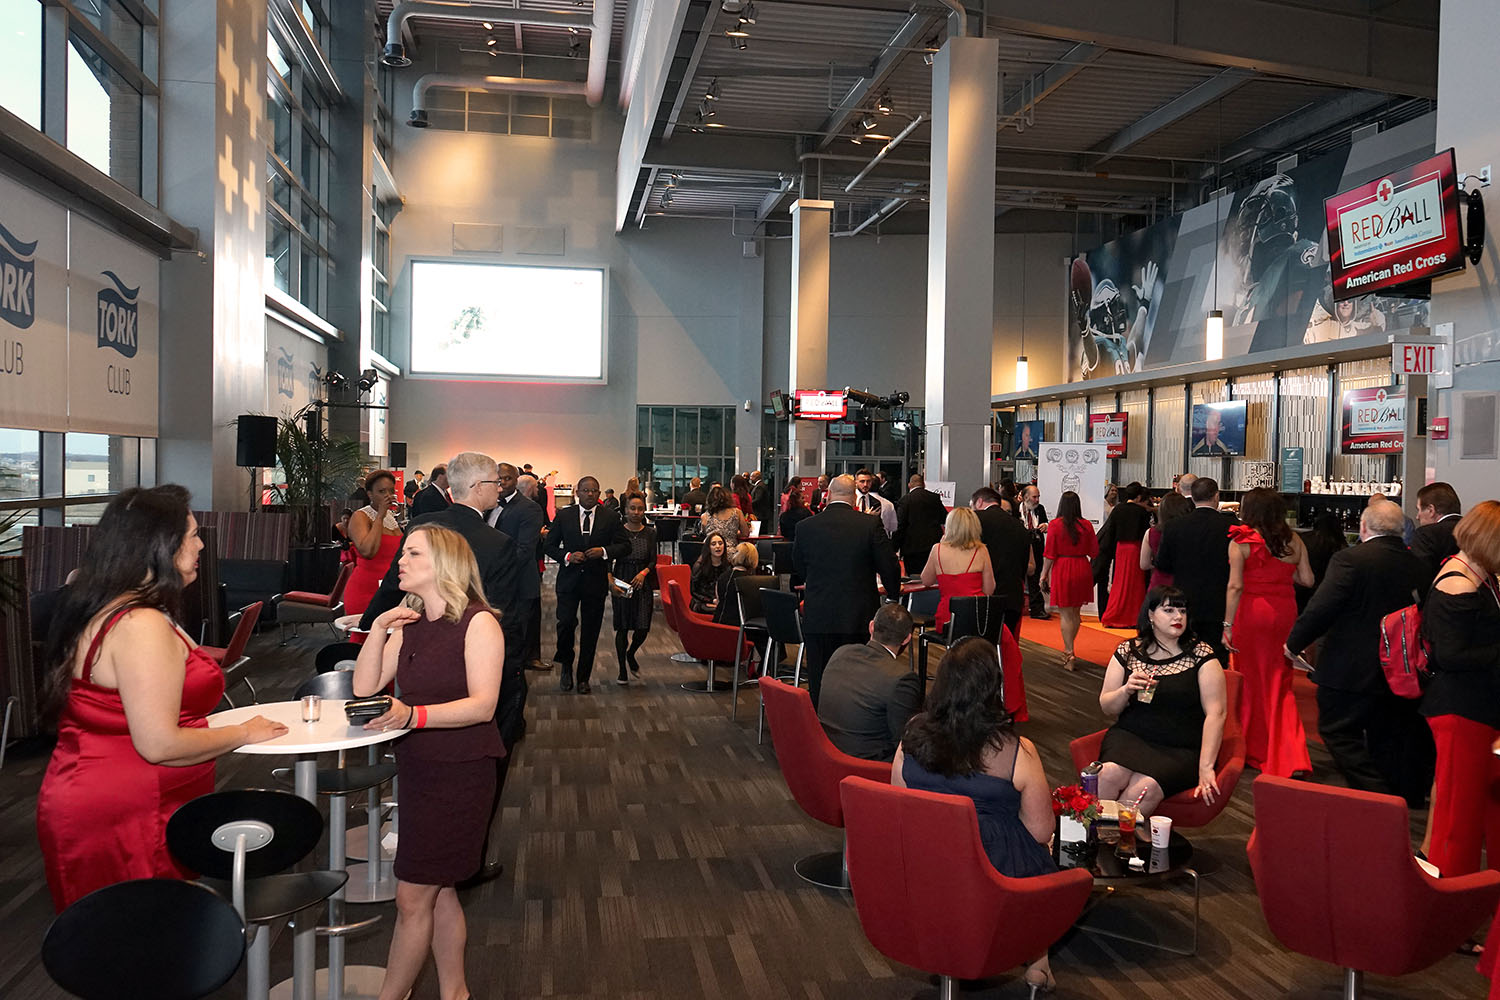 The Annual "Red Ball" gala for the American Red Cross took place at Lincoln Financial Field March 30th Photos: Peter Fitzpatrick/AL DIA News